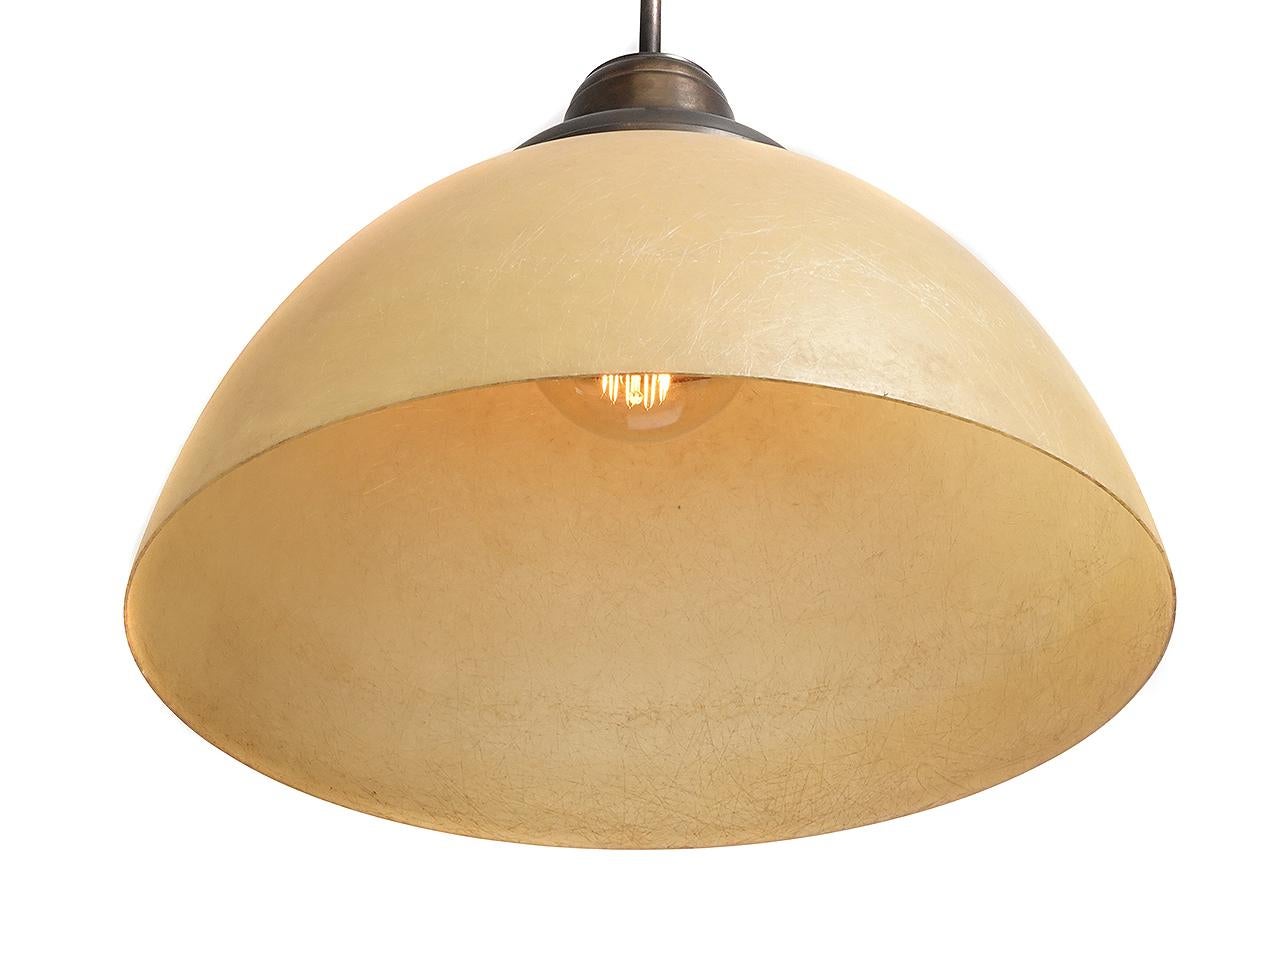 These fiberglass domes date to from the 1950s. We recently found a nice barn collection of these originals. When lit they give off a nice warm glow and feature the fiber texture. The new socket and shade holder combined with the early shade make a